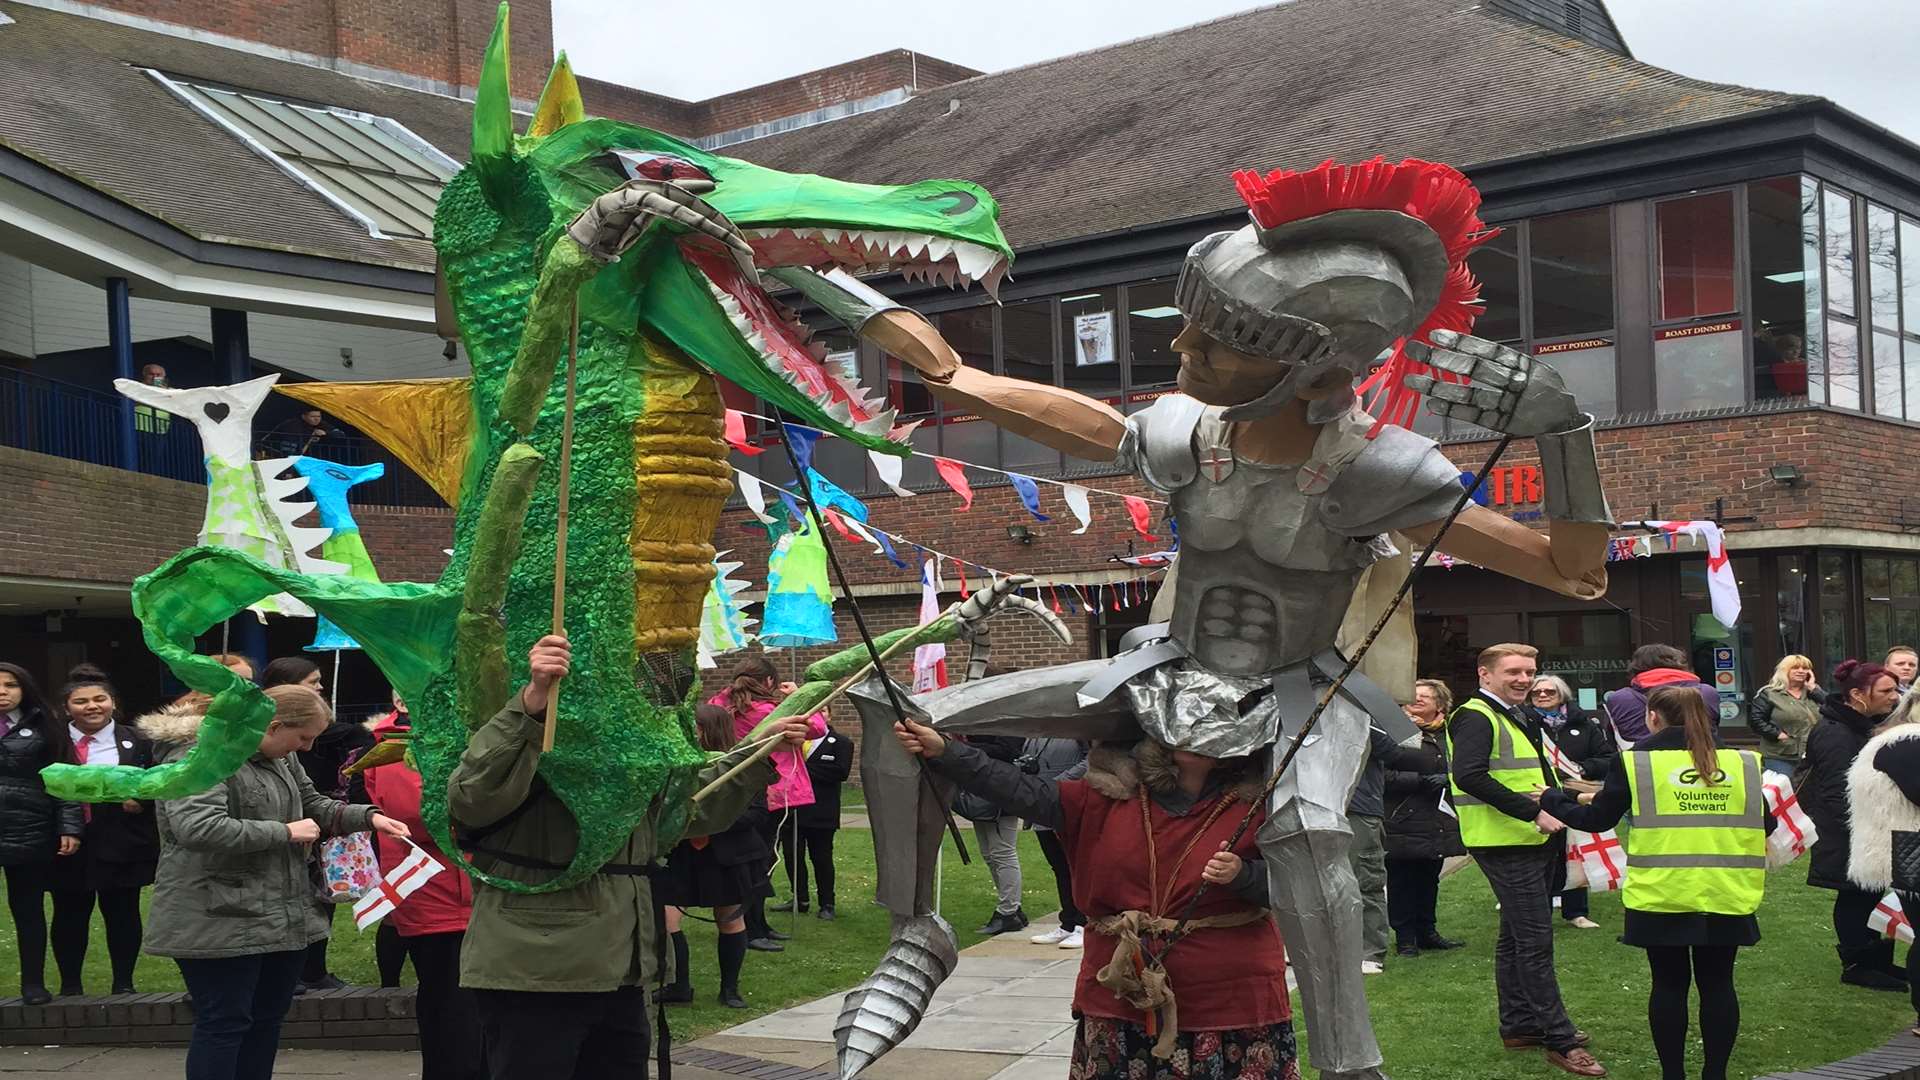 St George fights off the dragon in Gravesend